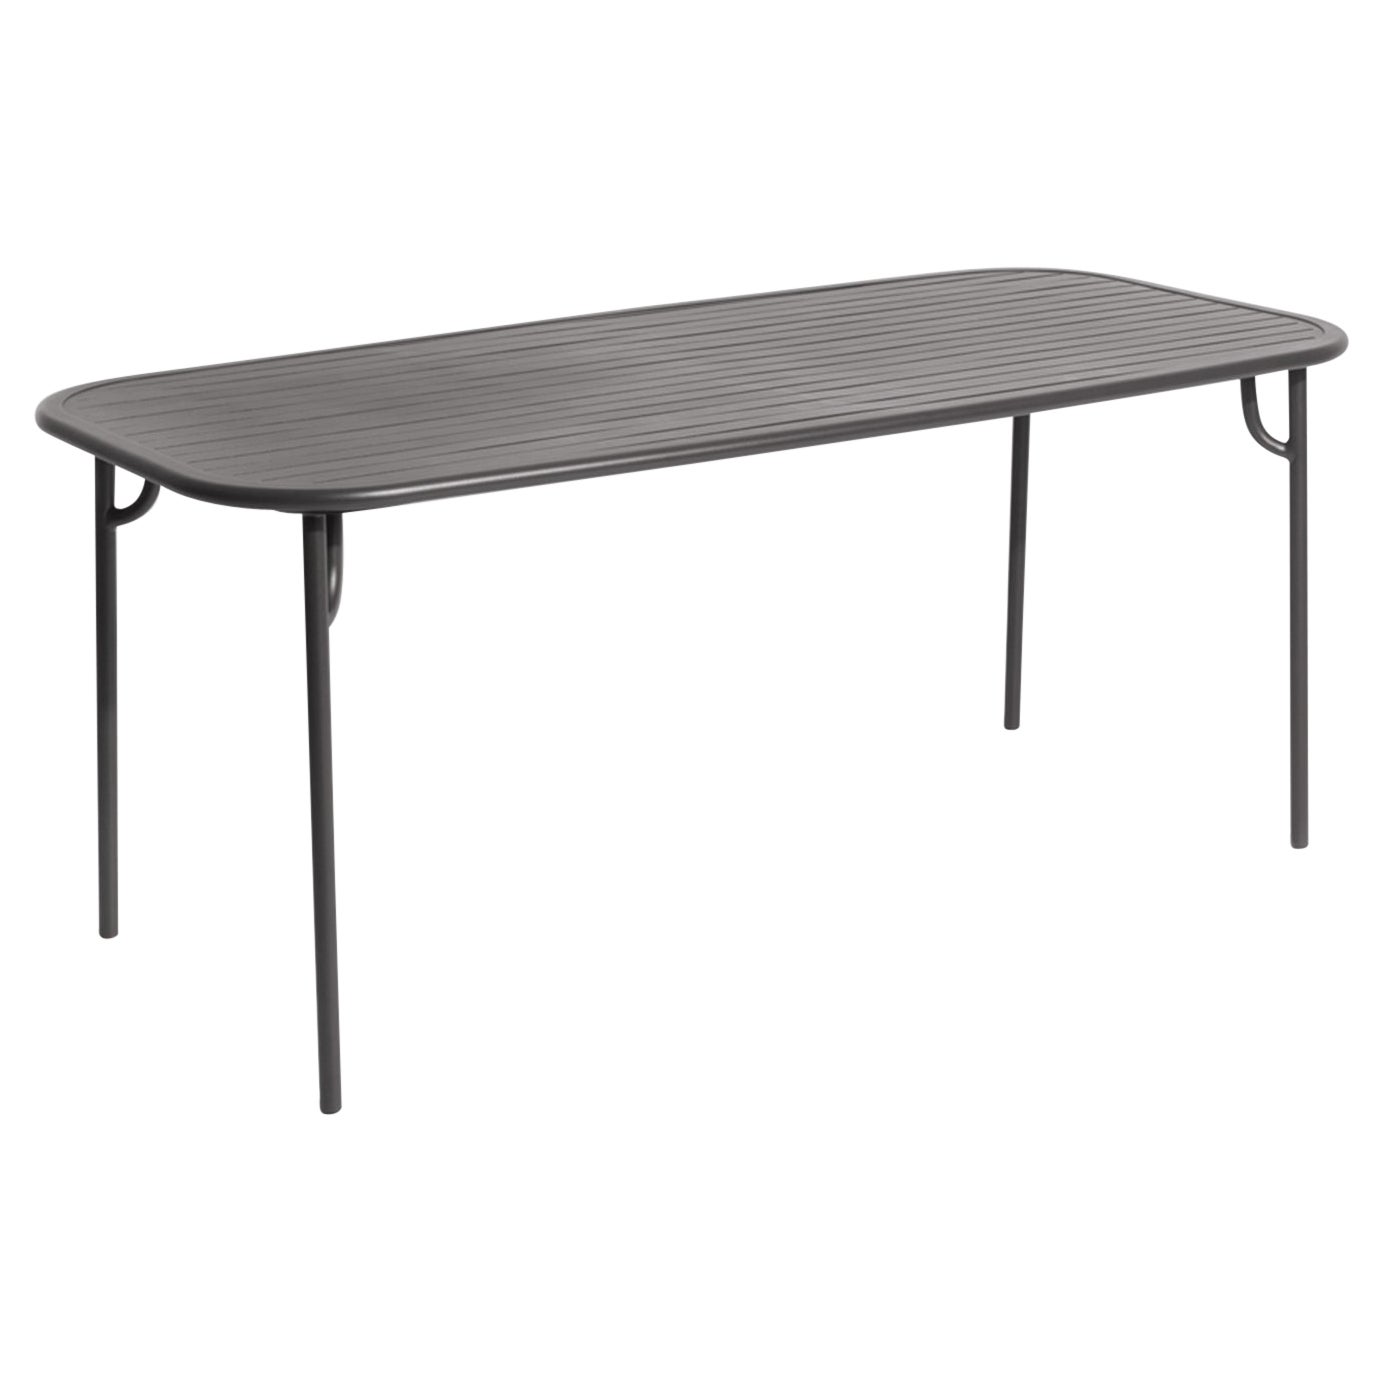 Petite Friture Week-End Medium Rectangular Dining Table in Anthracite with Slats